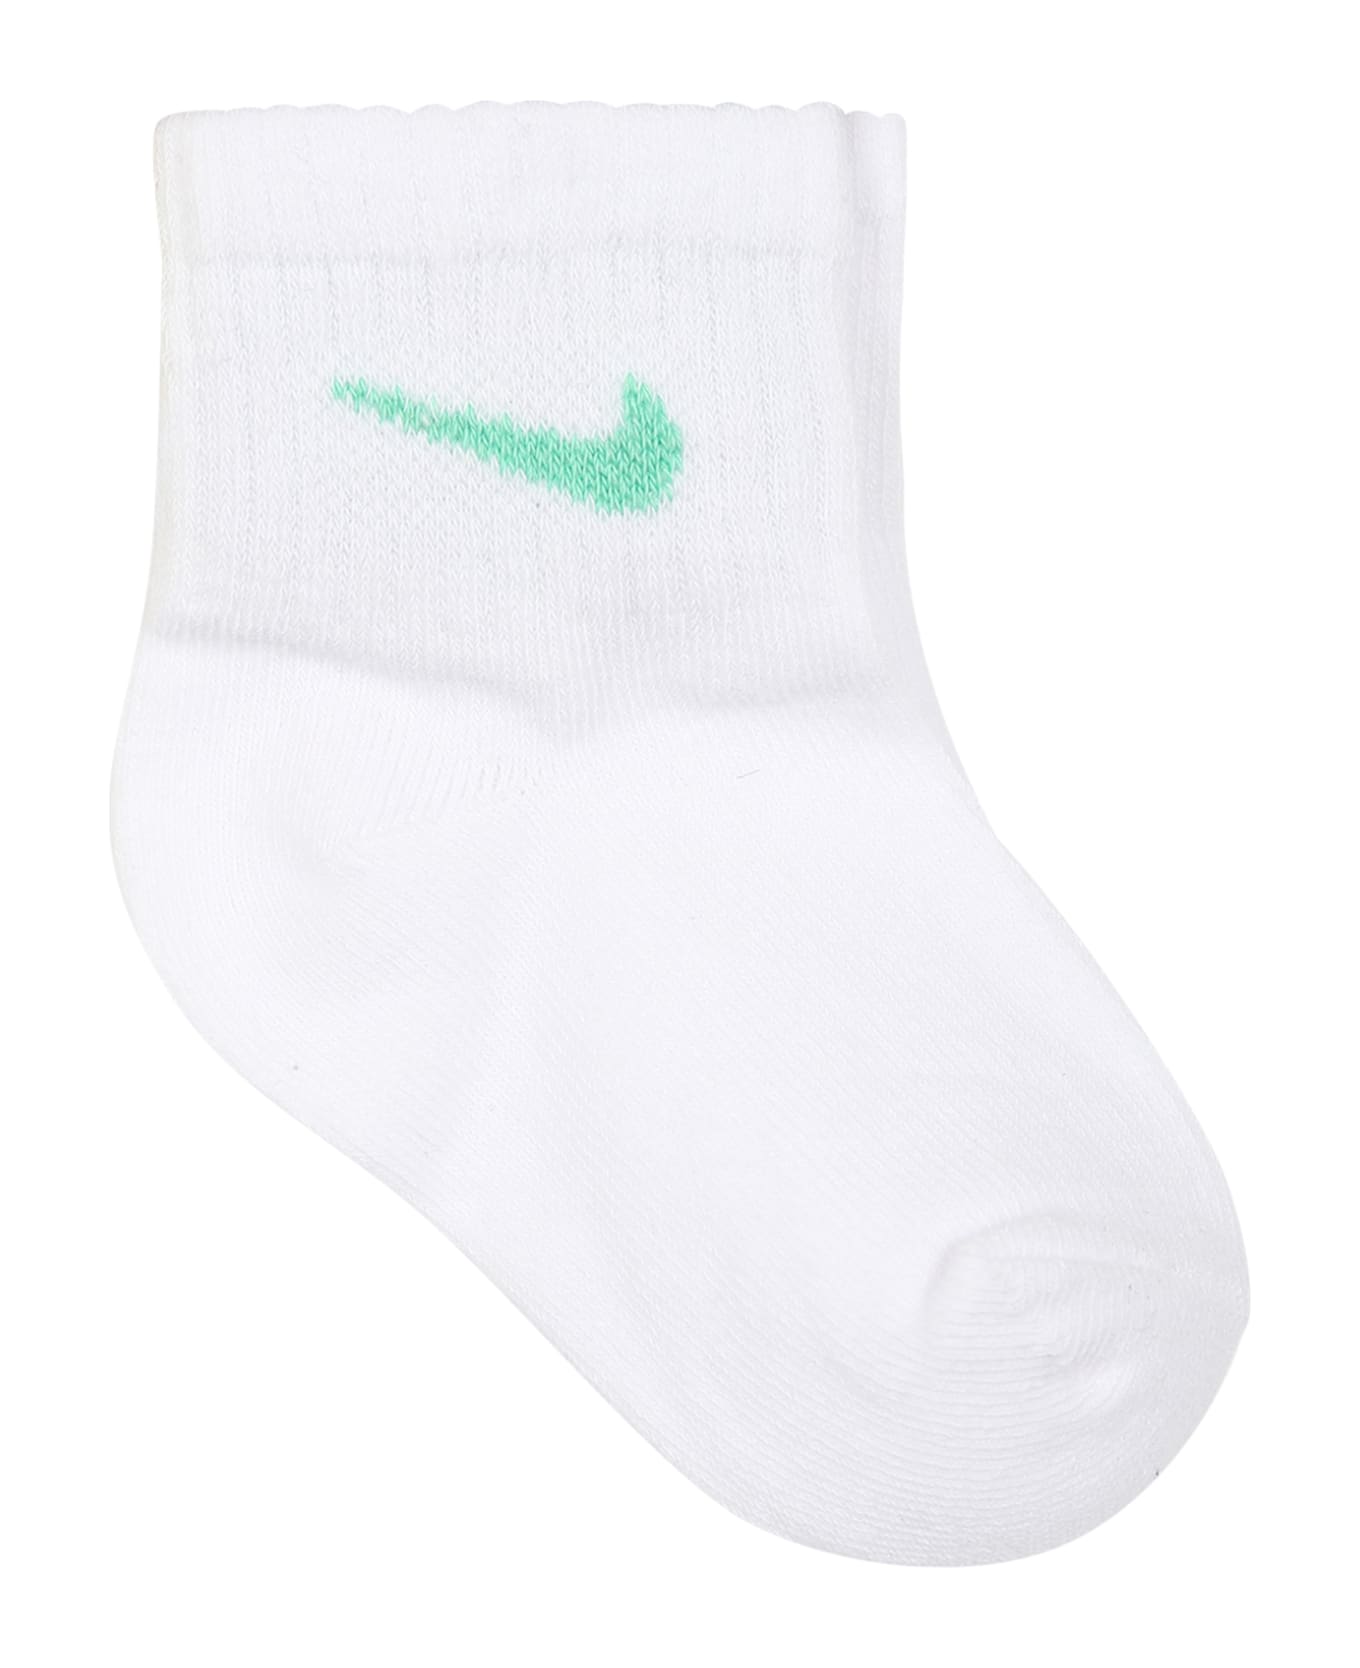 Nike Multicolor Set For Baby Girl With Iconic Swoosh - Multicolor